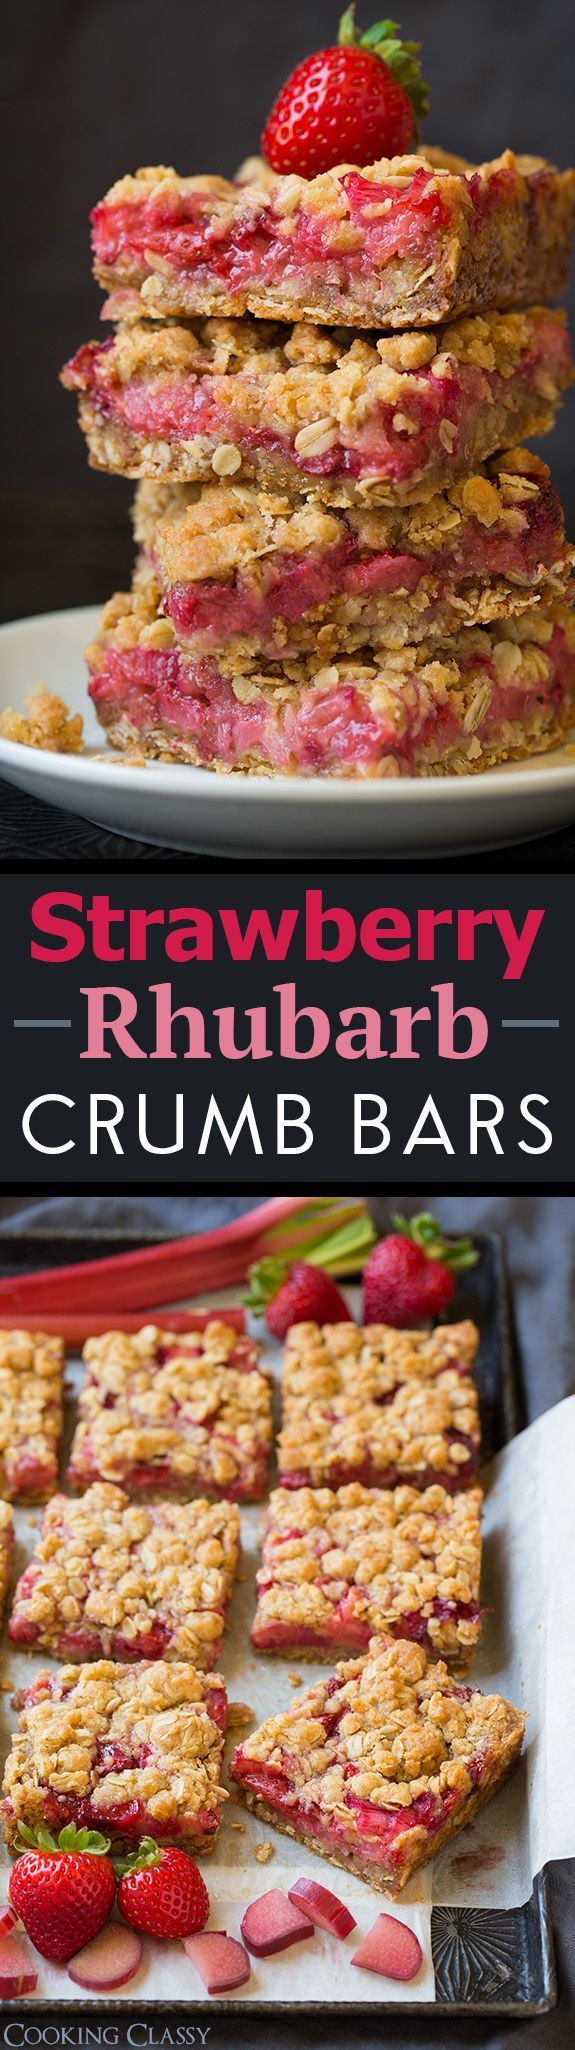 Strawberry Rhubarb Crumb Bars – one of my all time FAVORITE bar recipes!! I could stop eating them!